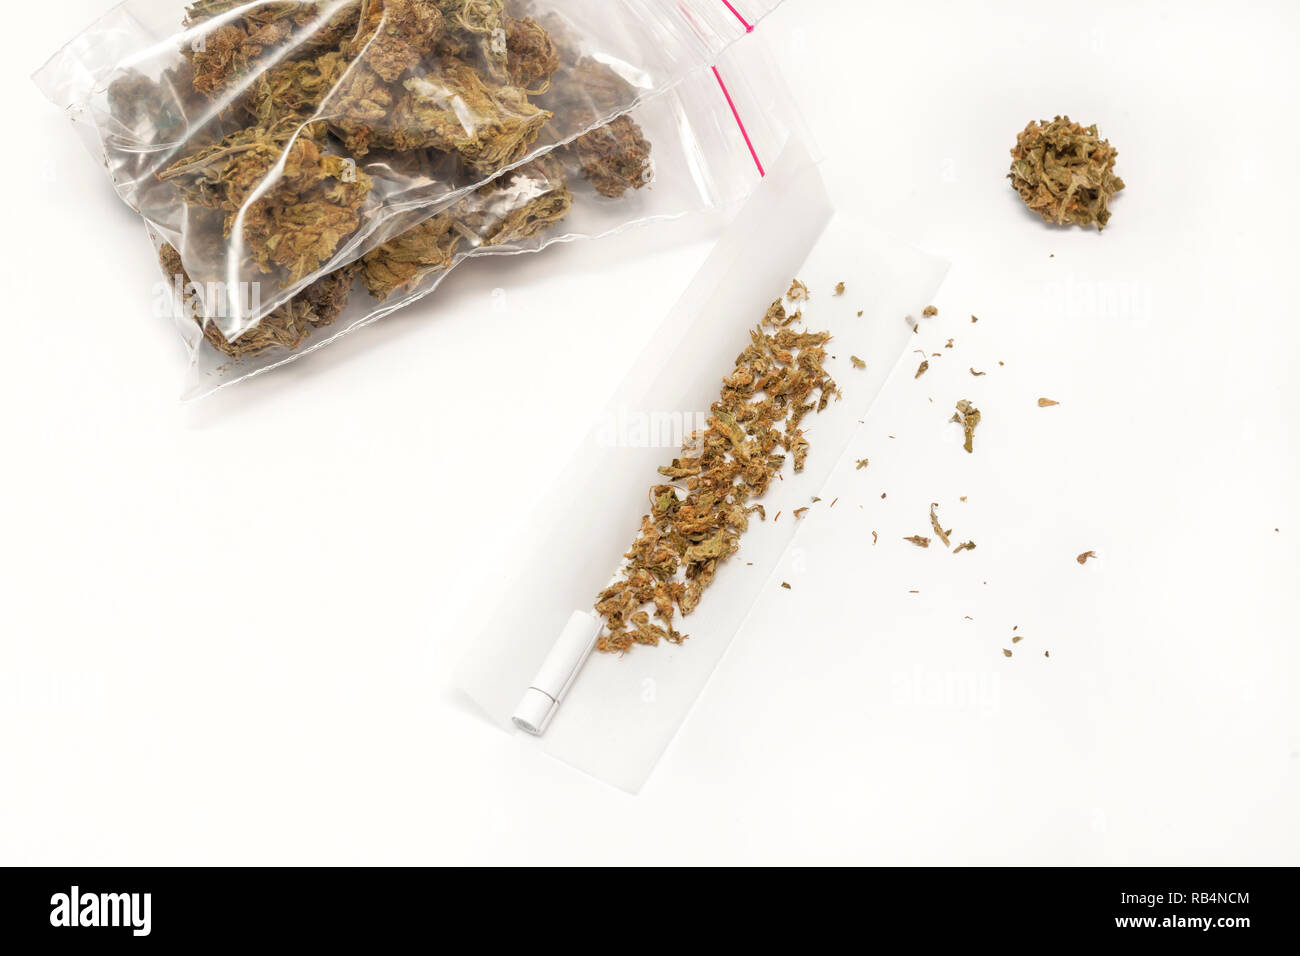 Preparing a medical cannabis joint with tobacco and rolling paper with marijuana bud in a sealed bag on white background.The insinuation of marijuana  Stock Photo